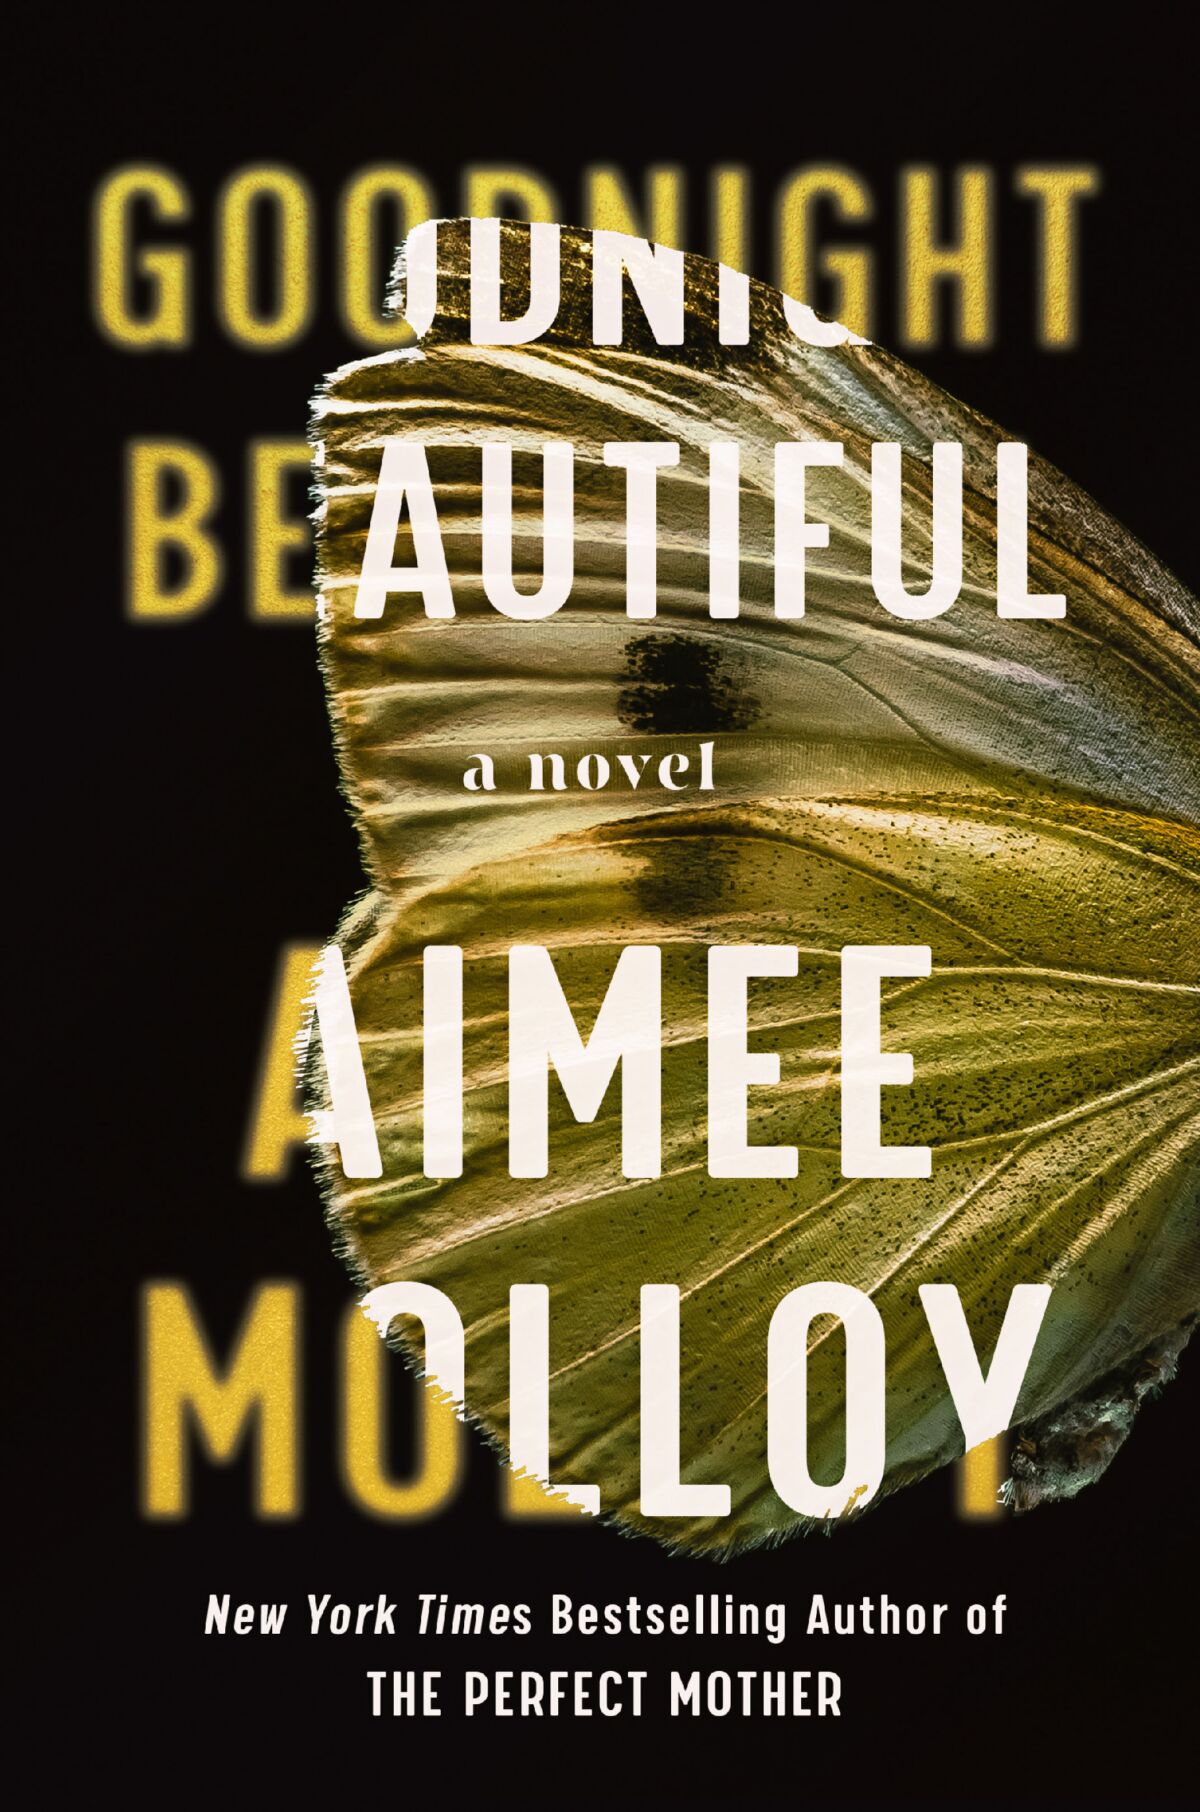 This cover image released by Harper shows "Goodnight Beautiful," a novel by Aimee Molloy. (Harper via AP)